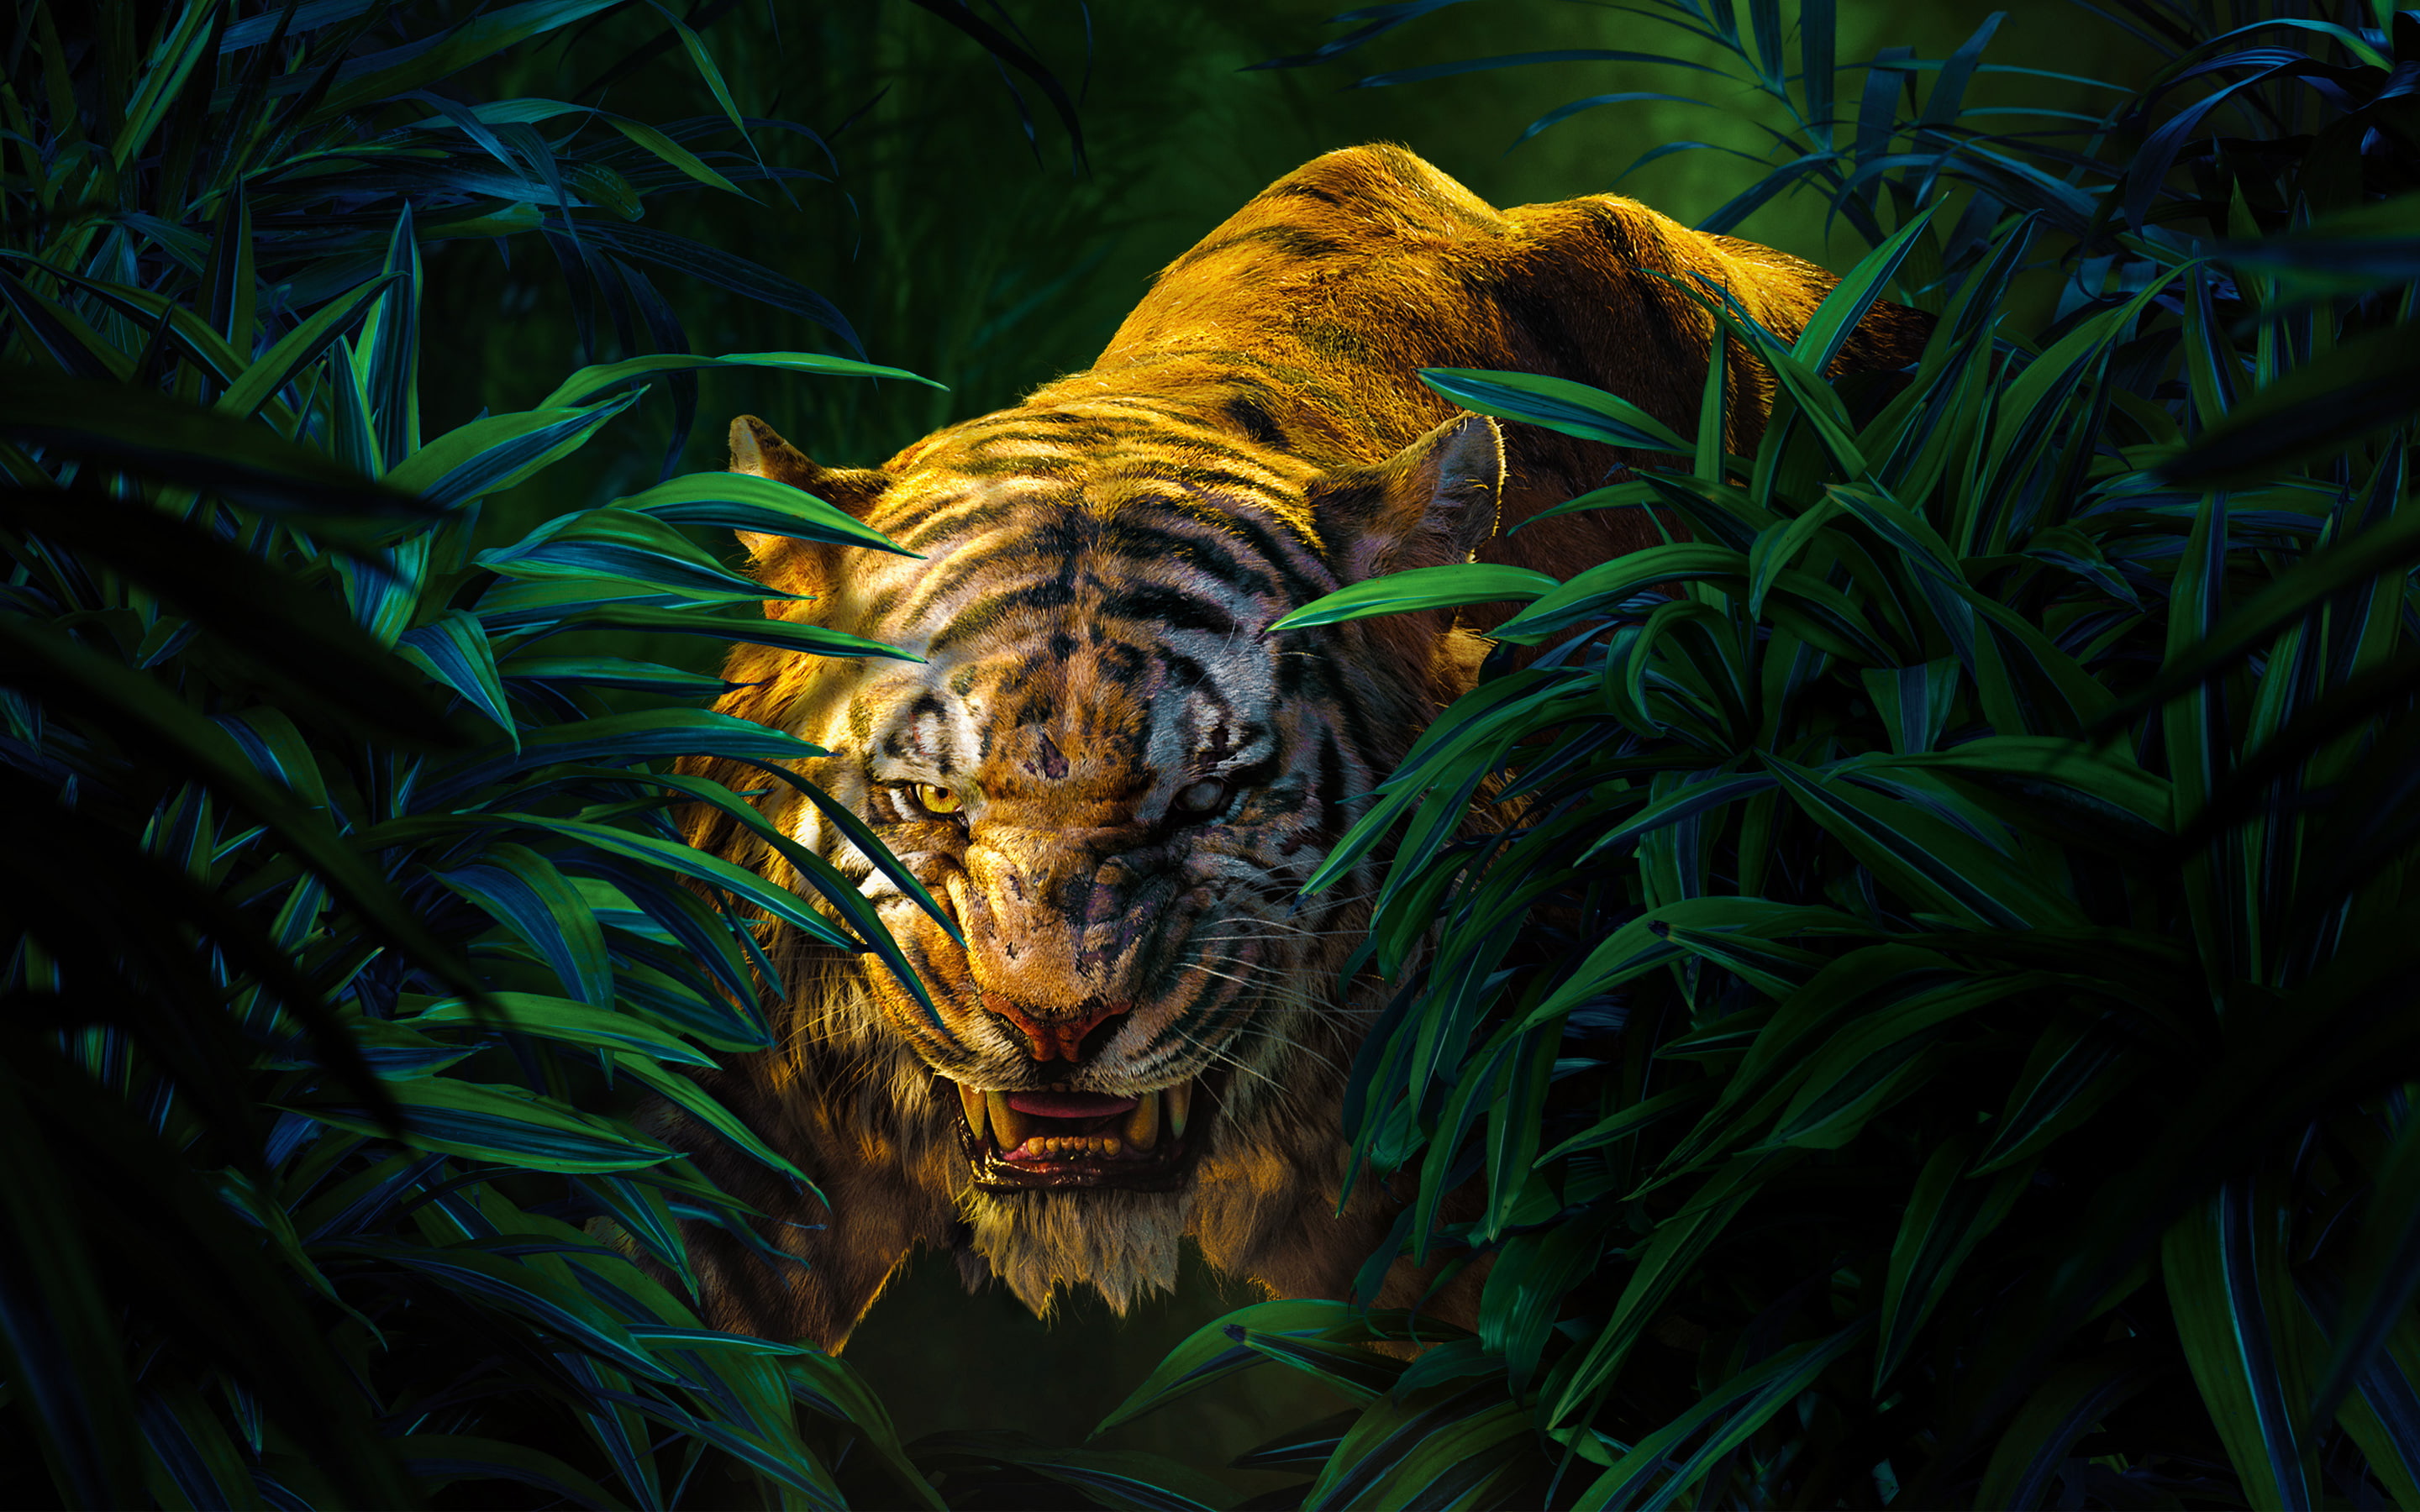 Shere Khan The Jungle Book, green color, plant, growth, animal